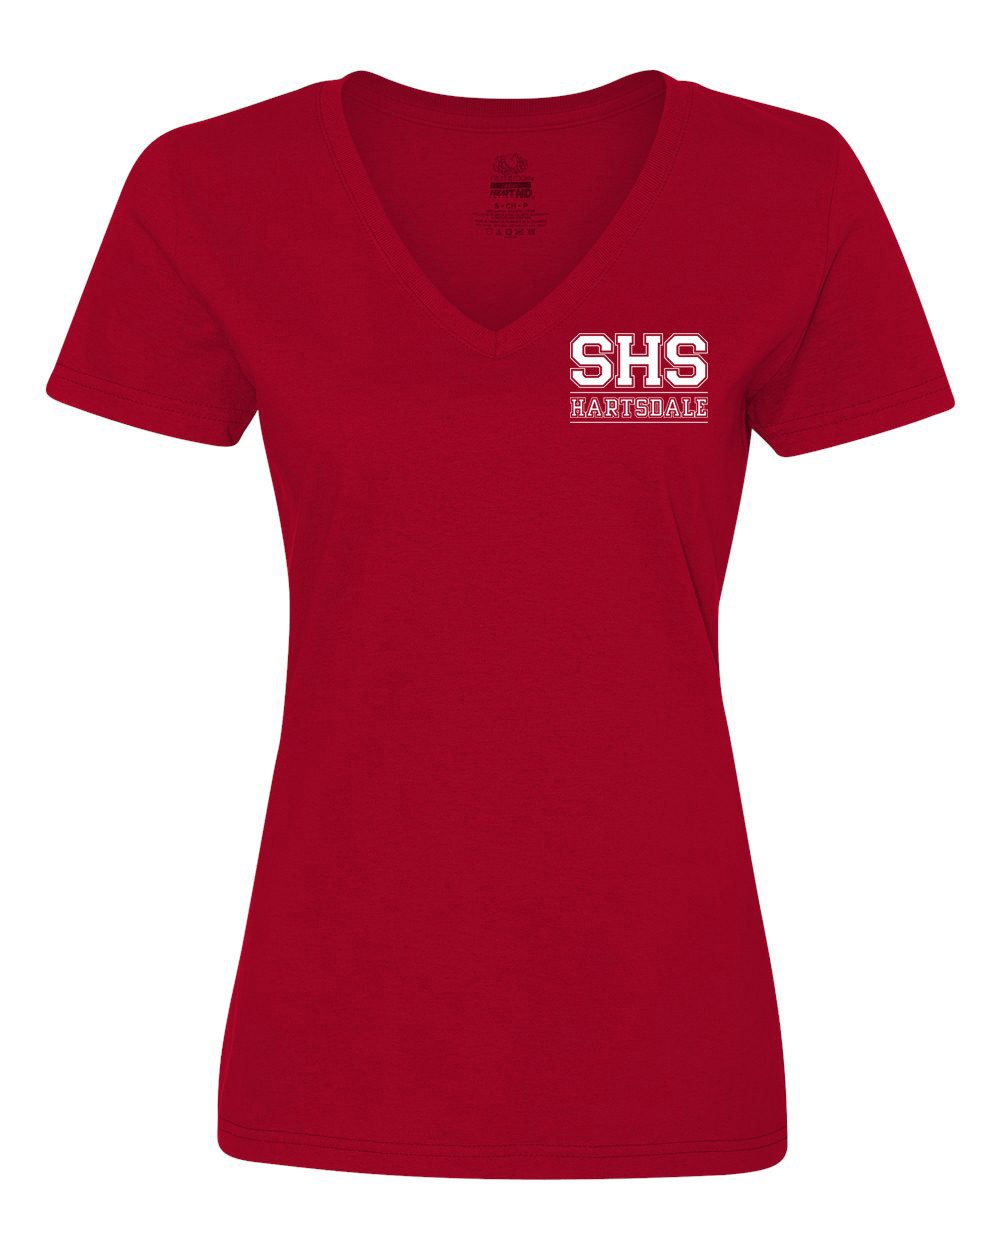 SHS Staff S/S Women's V-Neck T-Shirt w/ White Logo - Please Allow 2-3 Weeks for Delivery